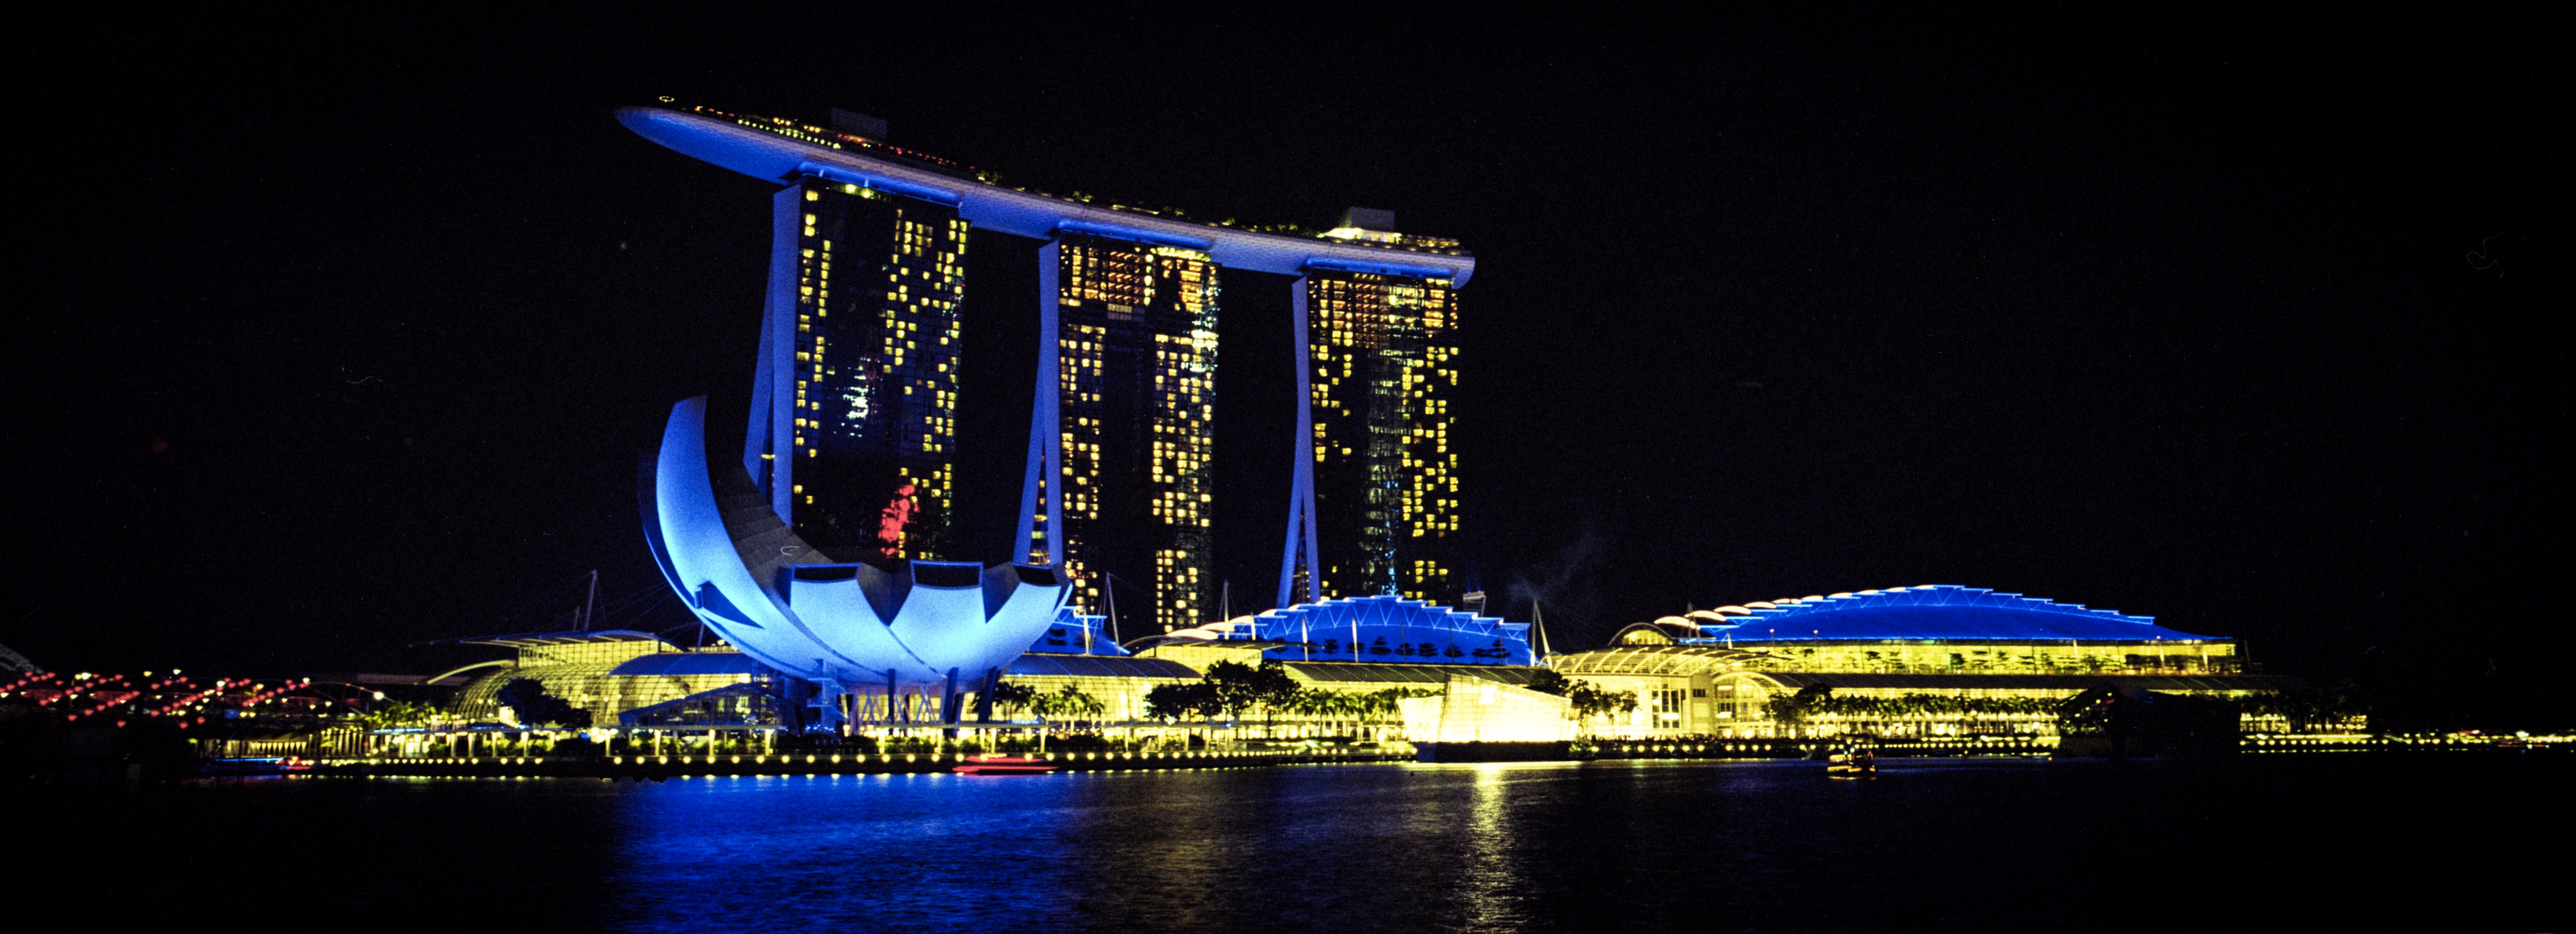 Read more about the article SINGAPORE IN PANORAMA MODE